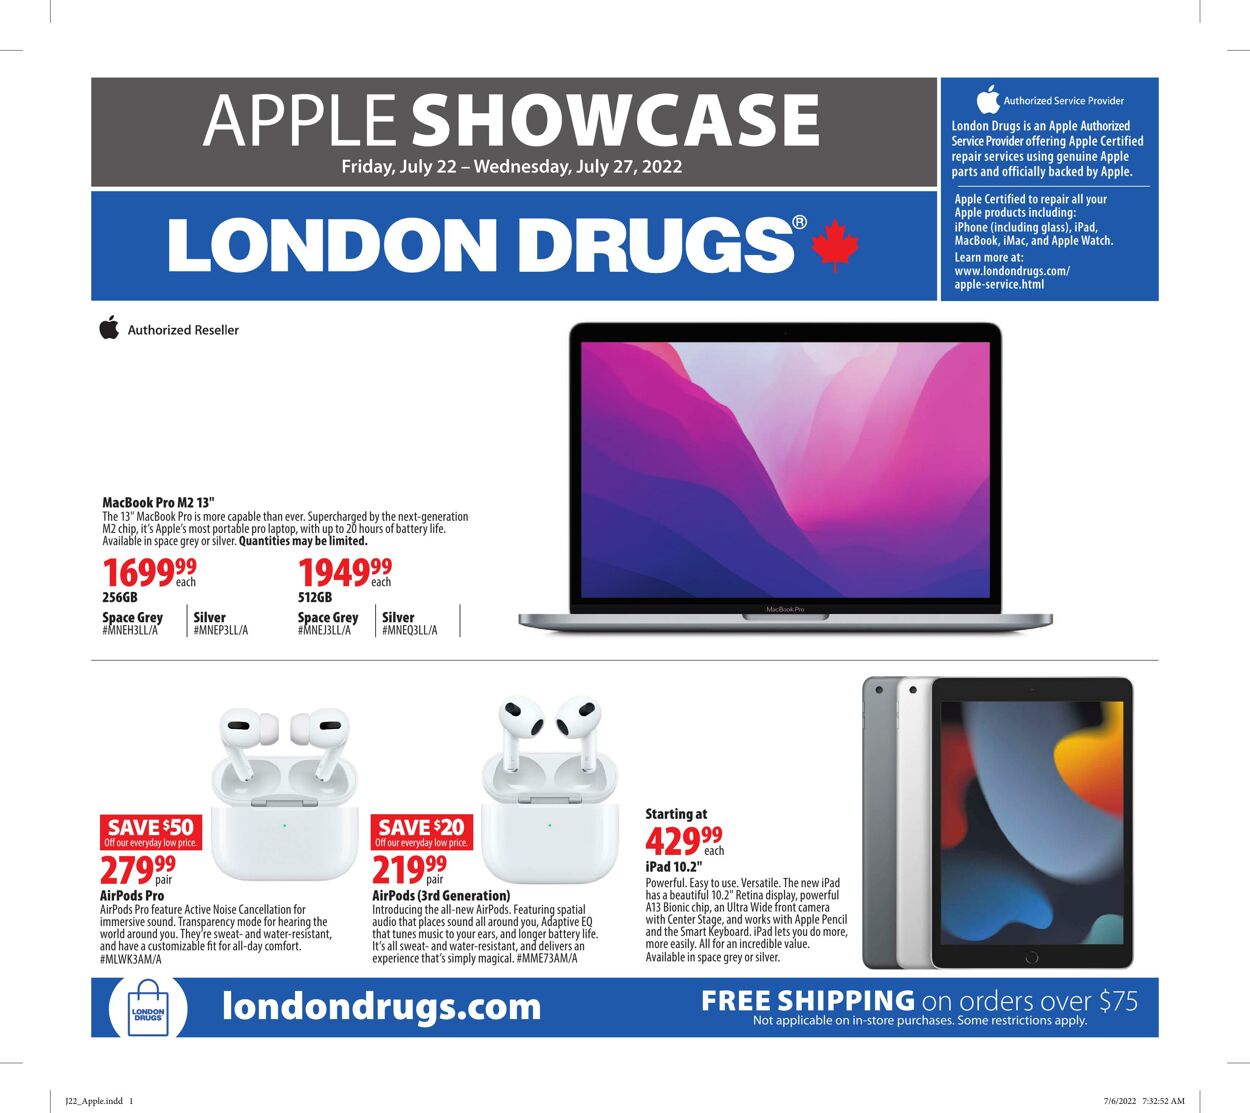 Circulaire London Drugs 22.07.2022 - 27.07.2022